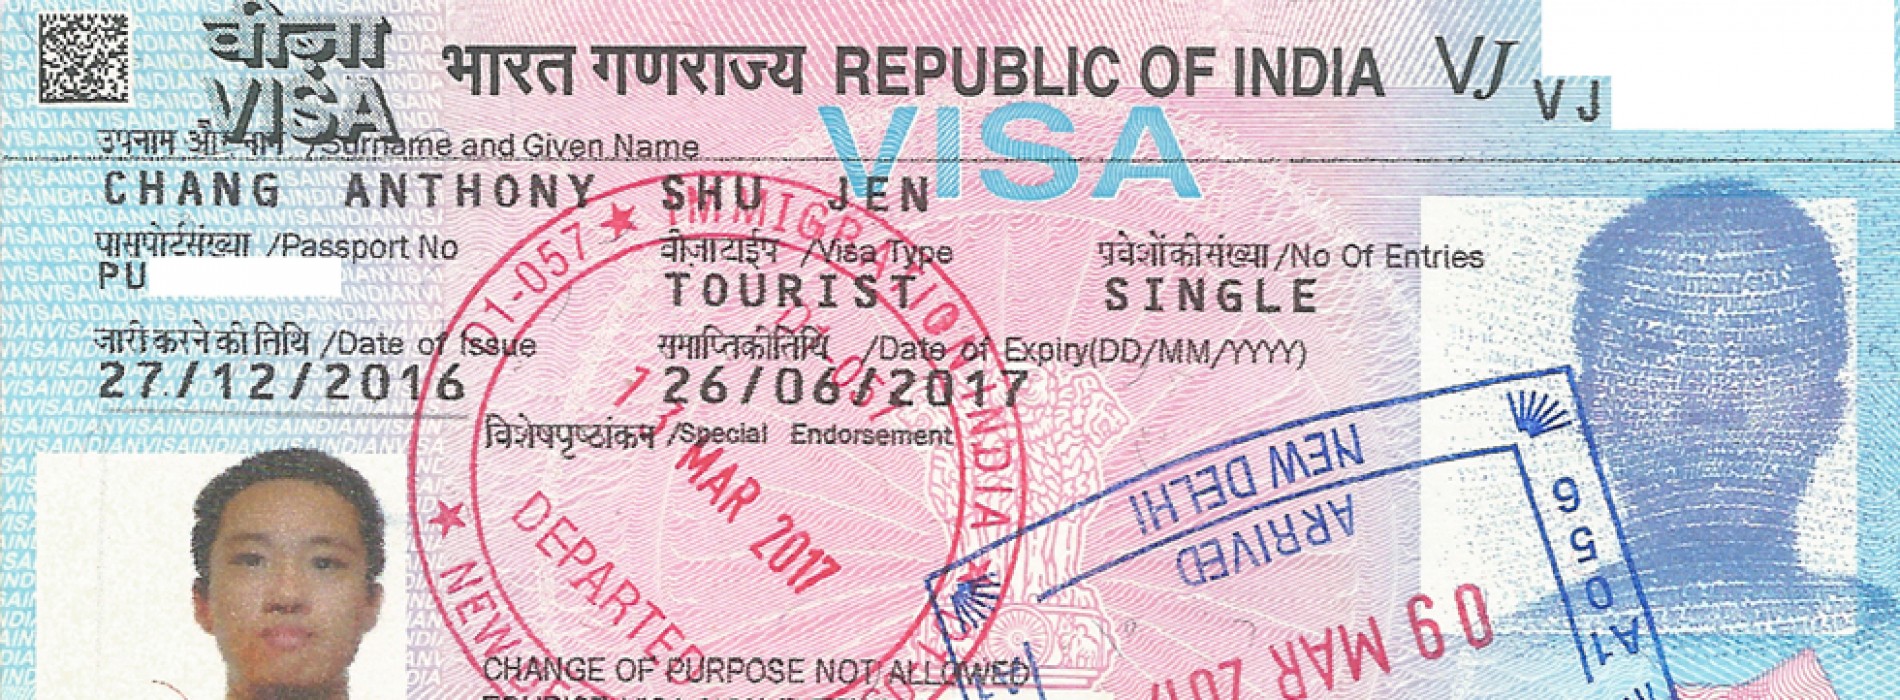 INDIA LIKELY TO REVERT TO IN-HOUSE VISA APPLICATION PROCESSING ABROAD